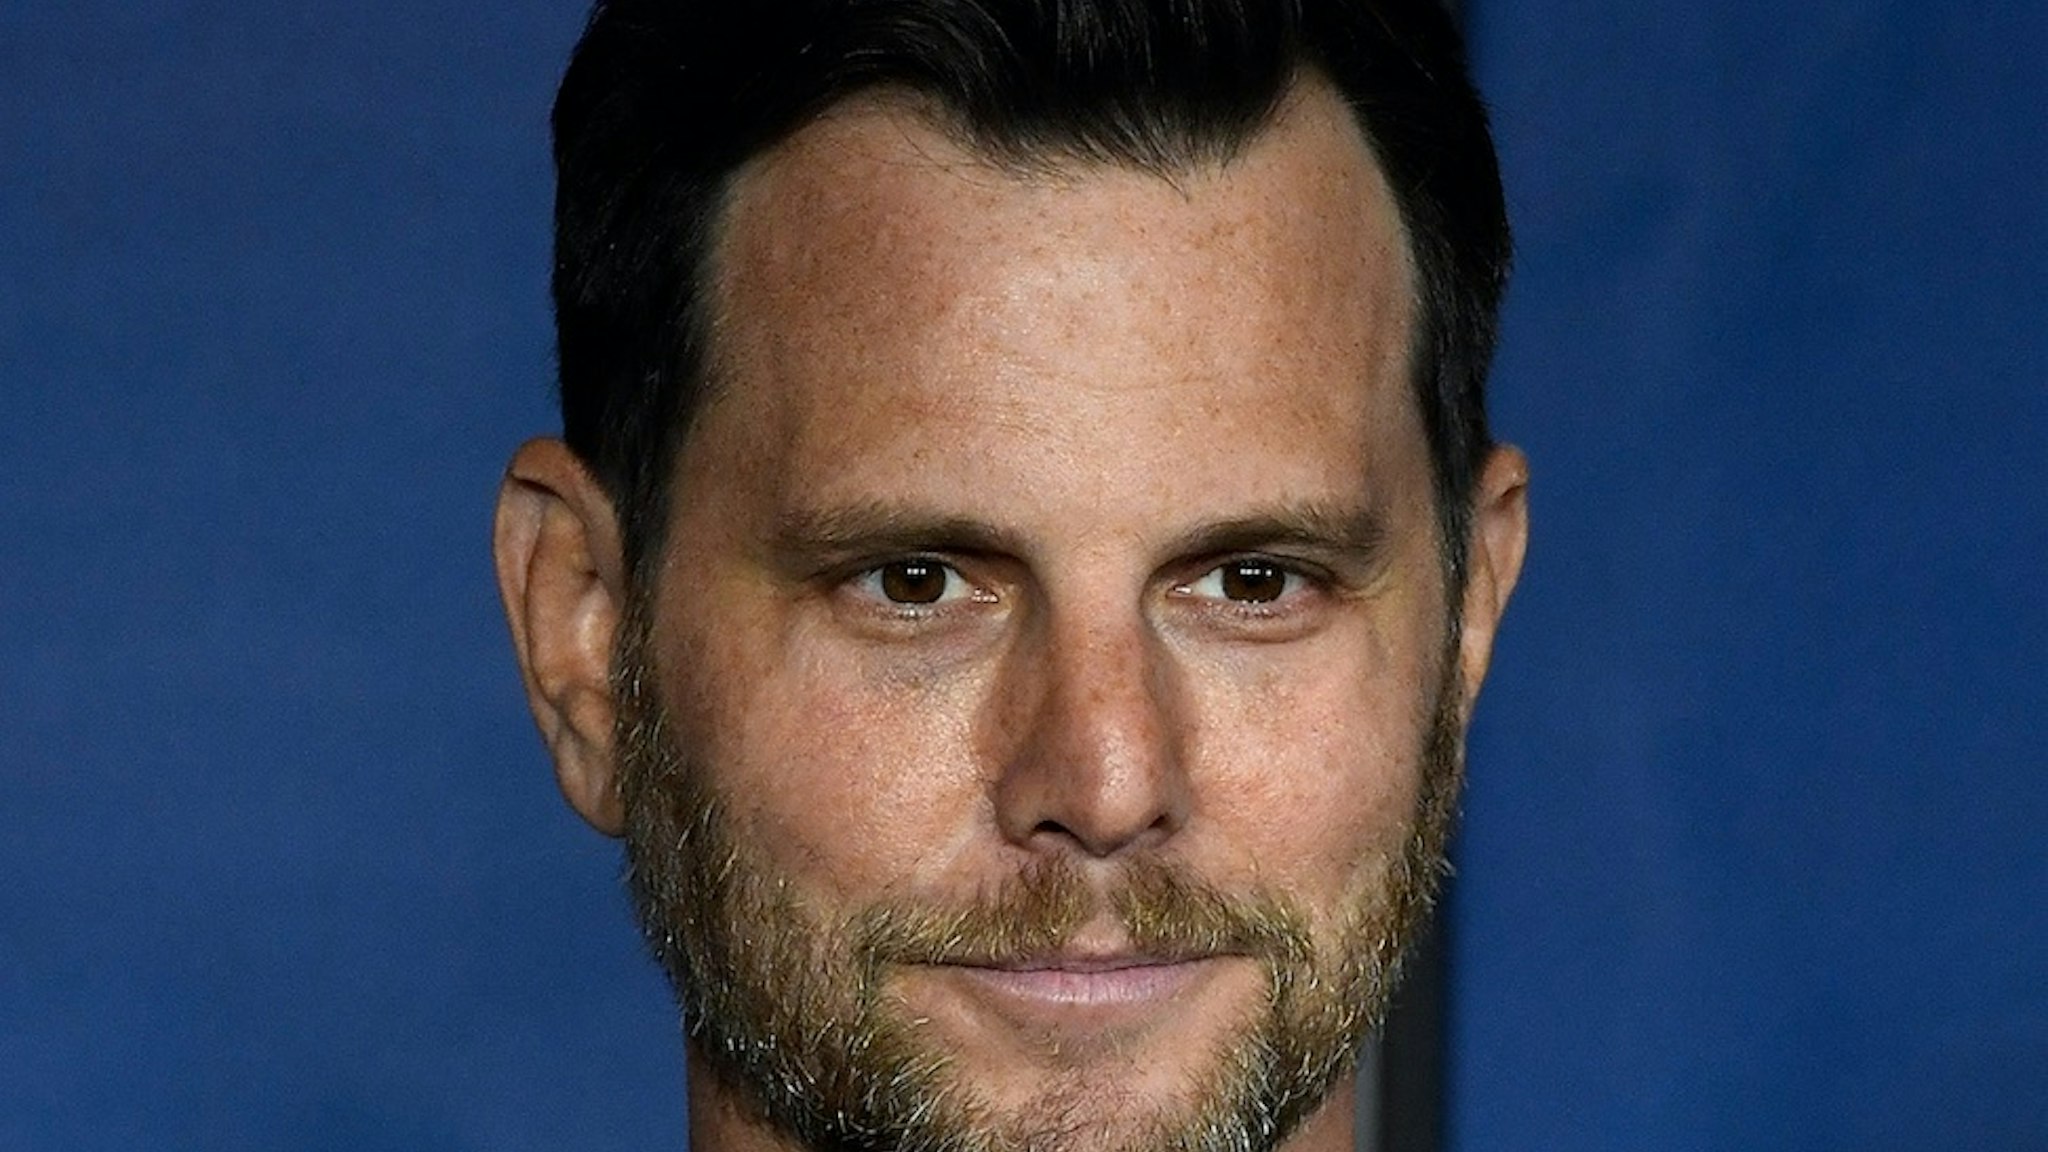 Political commentator, comedian and television personality Dave Rubin performs during his appearance at The Ice House Comedy Club on March 8, 2019 in Pasadena, California.